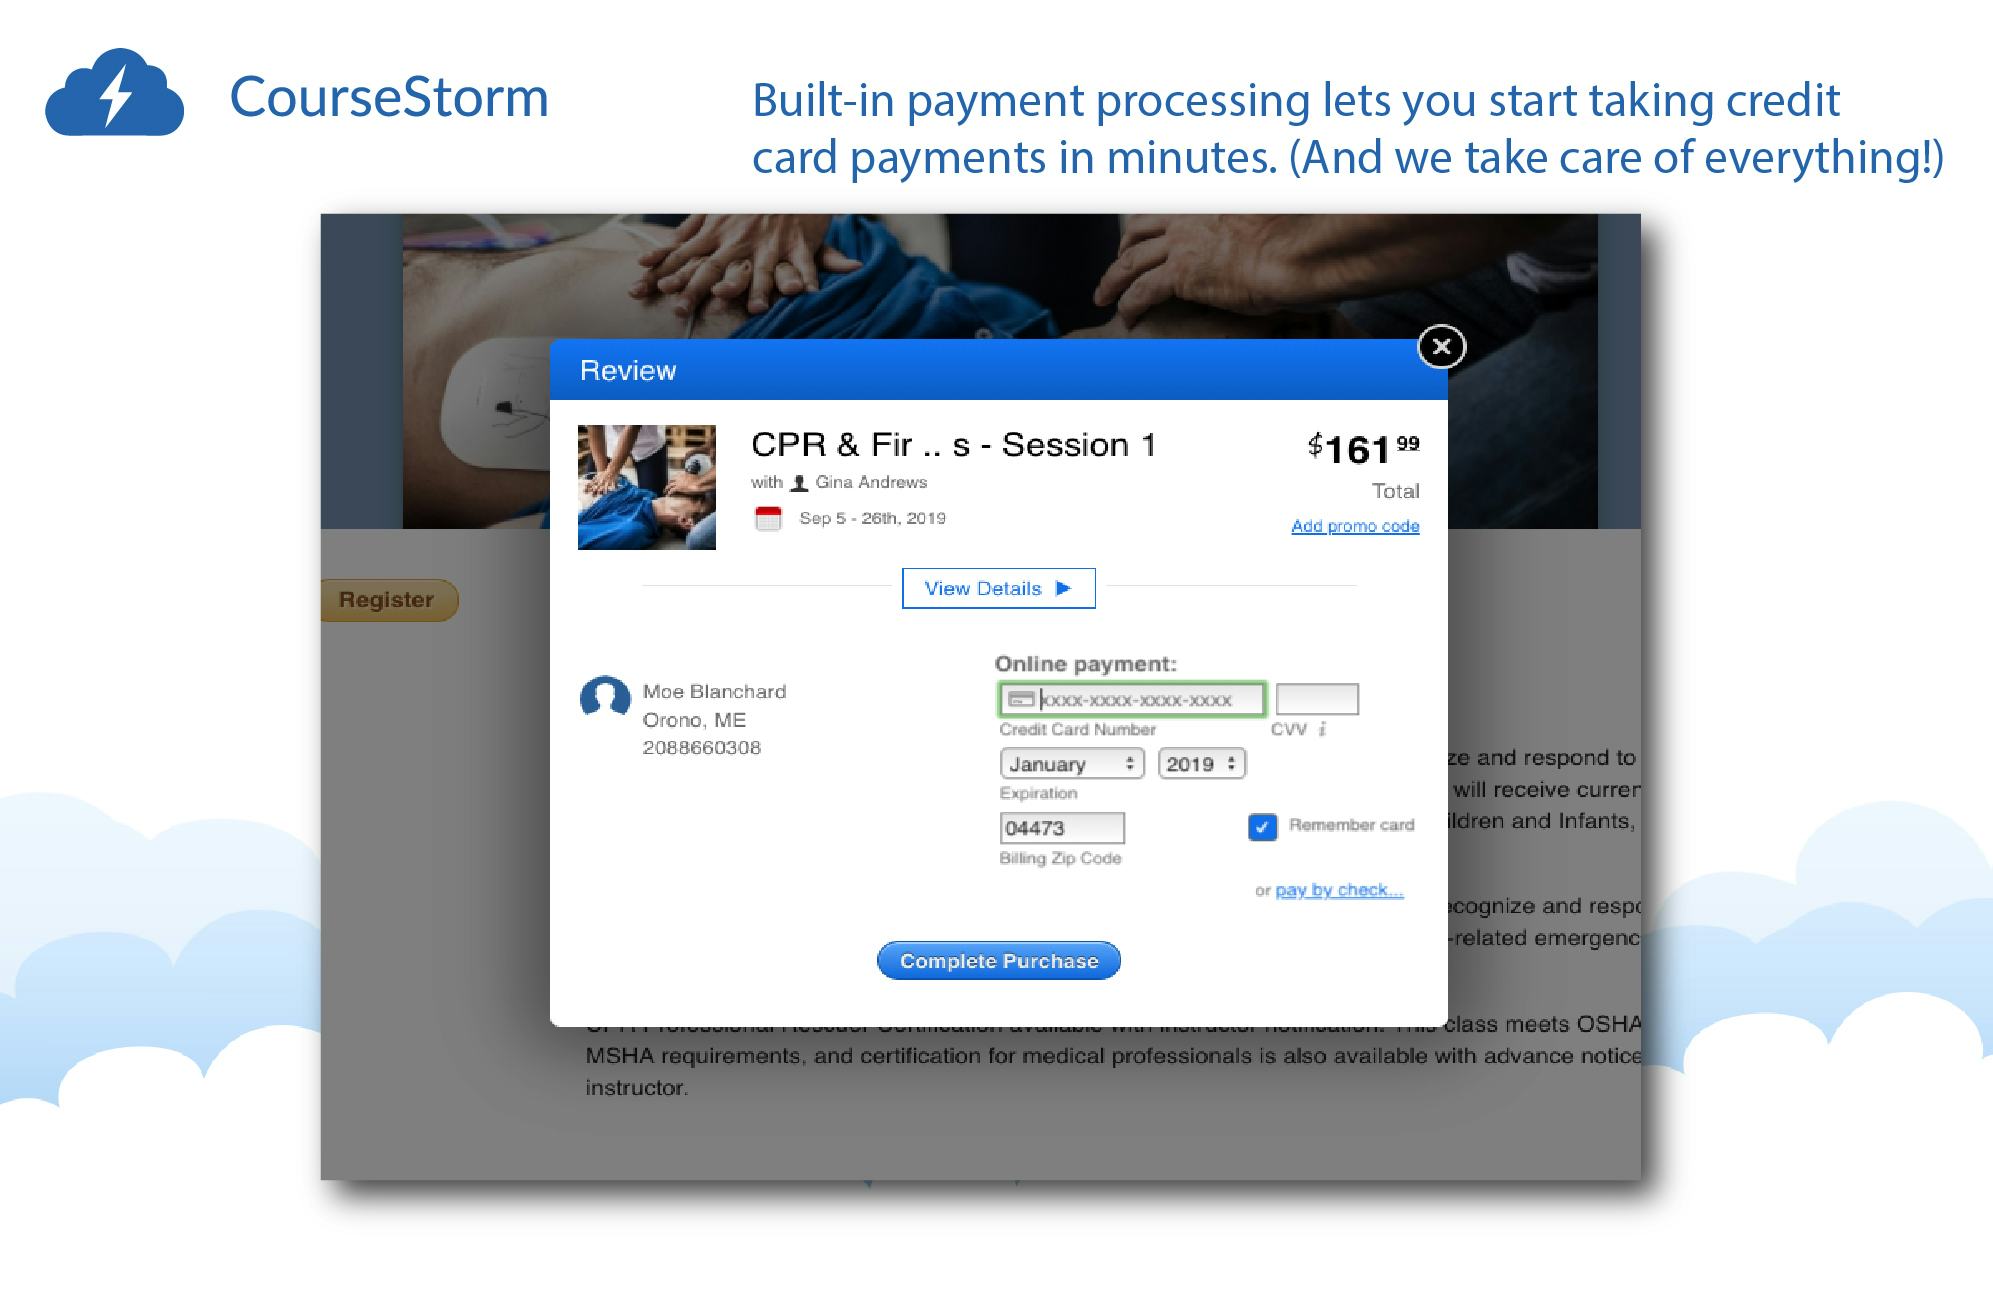 CourseStorm Software - Built-in payment processing lets you start taking credit card payments in minutes. (And we take care of everything!)